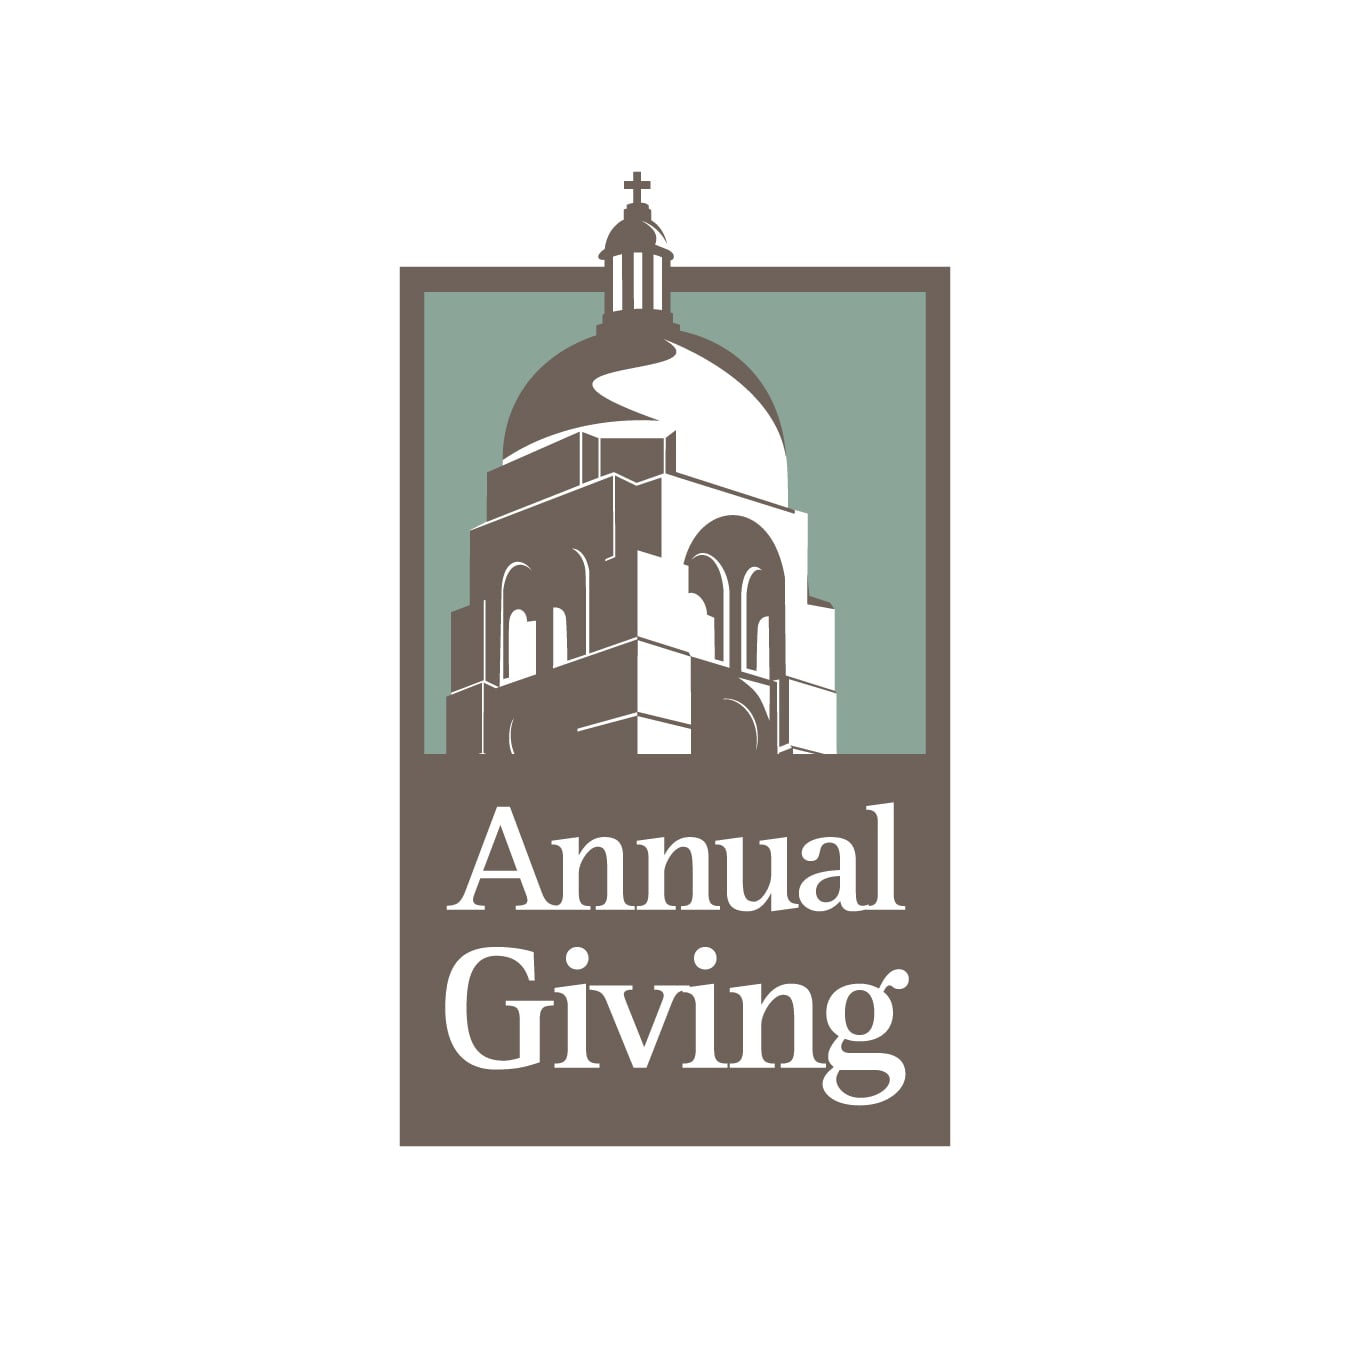 The Bishop's School Annual Giving